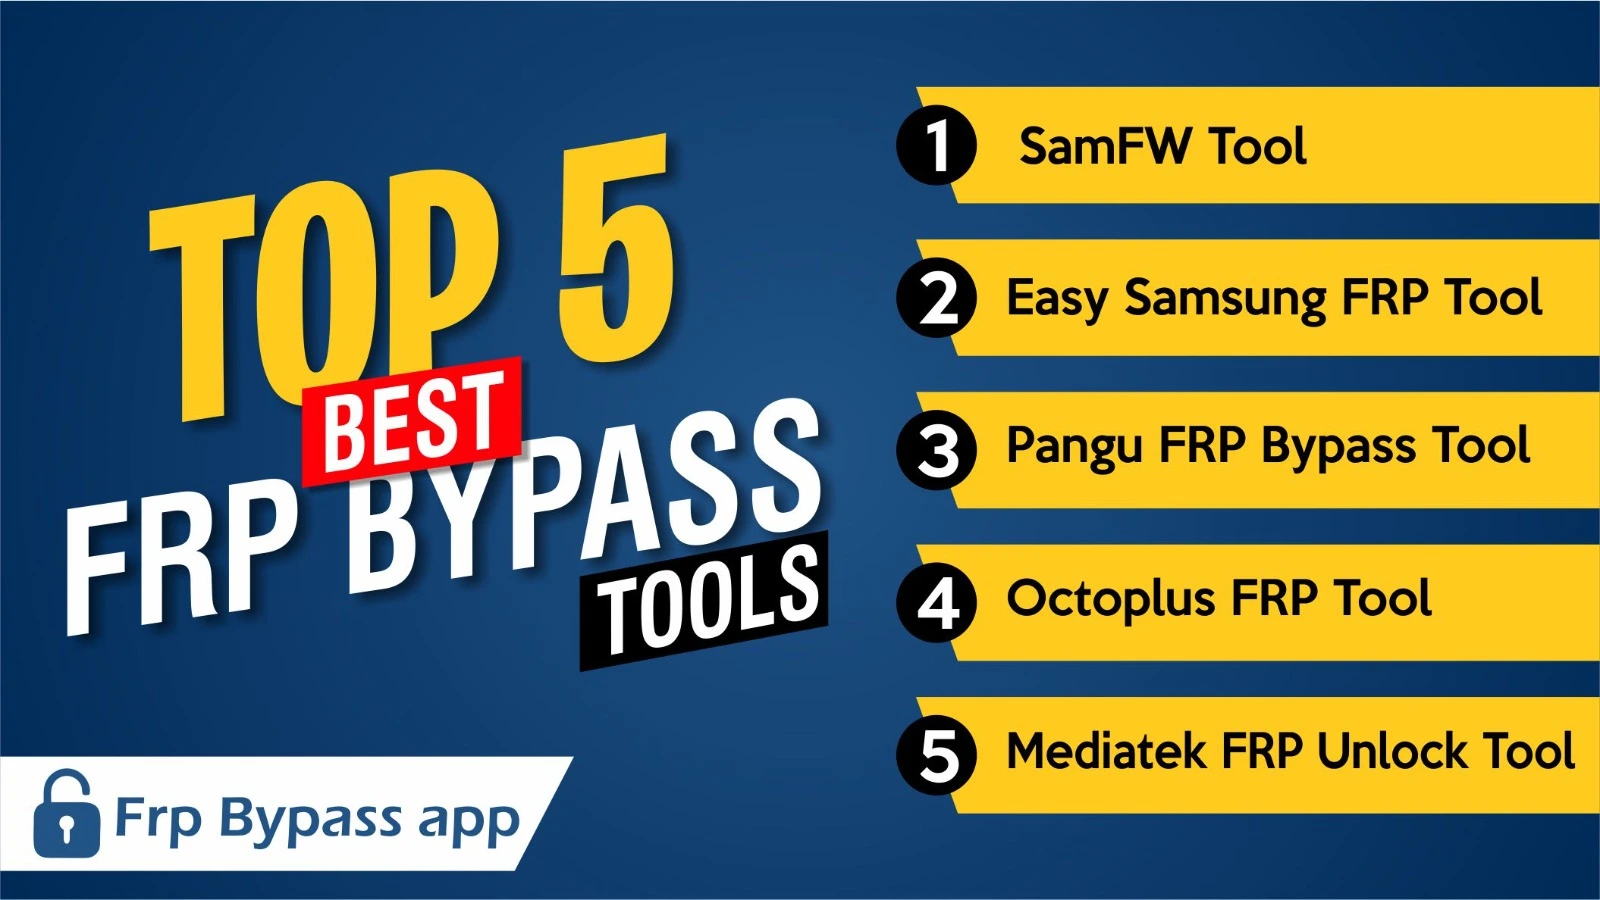 best FRP bypass tools image